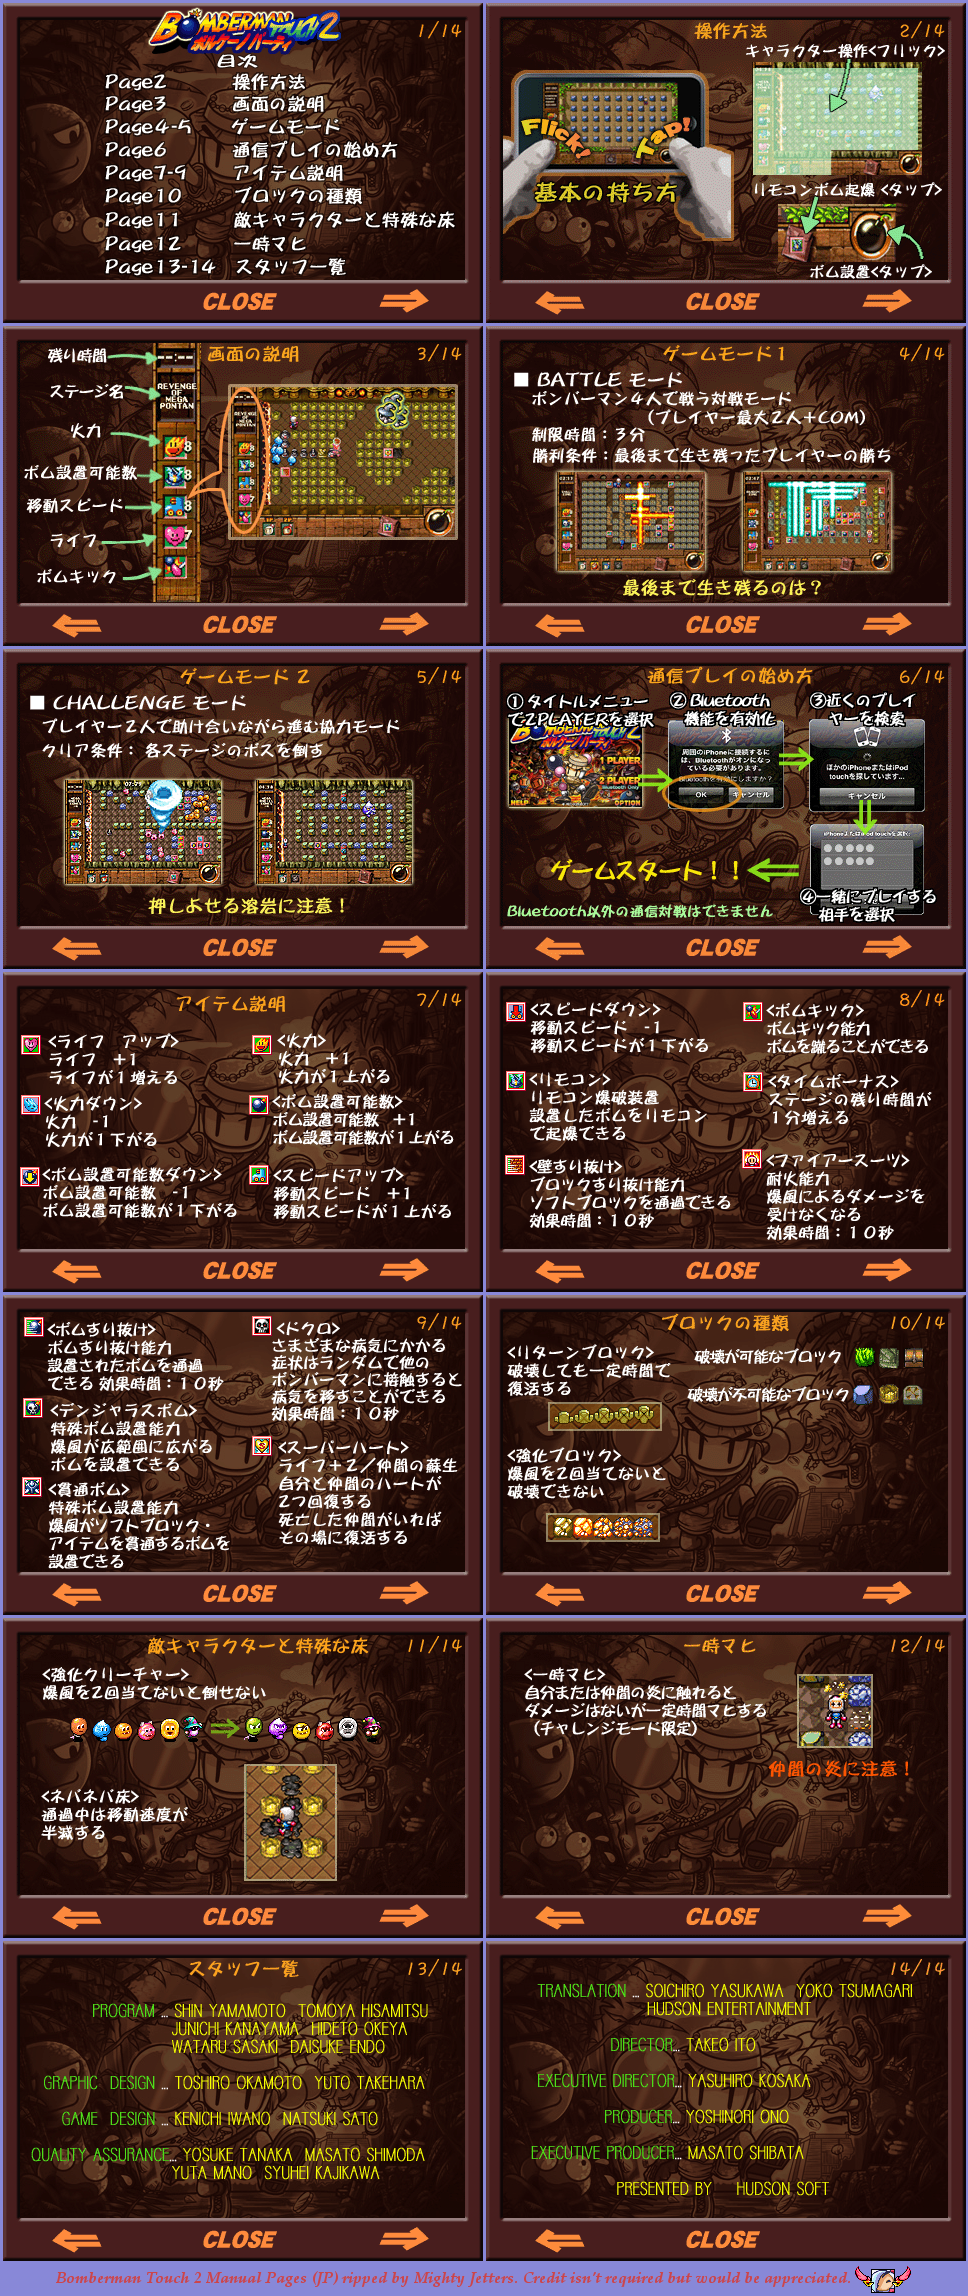 Bomberman Touch 2: Volcano Party - Manual Pages (JP)